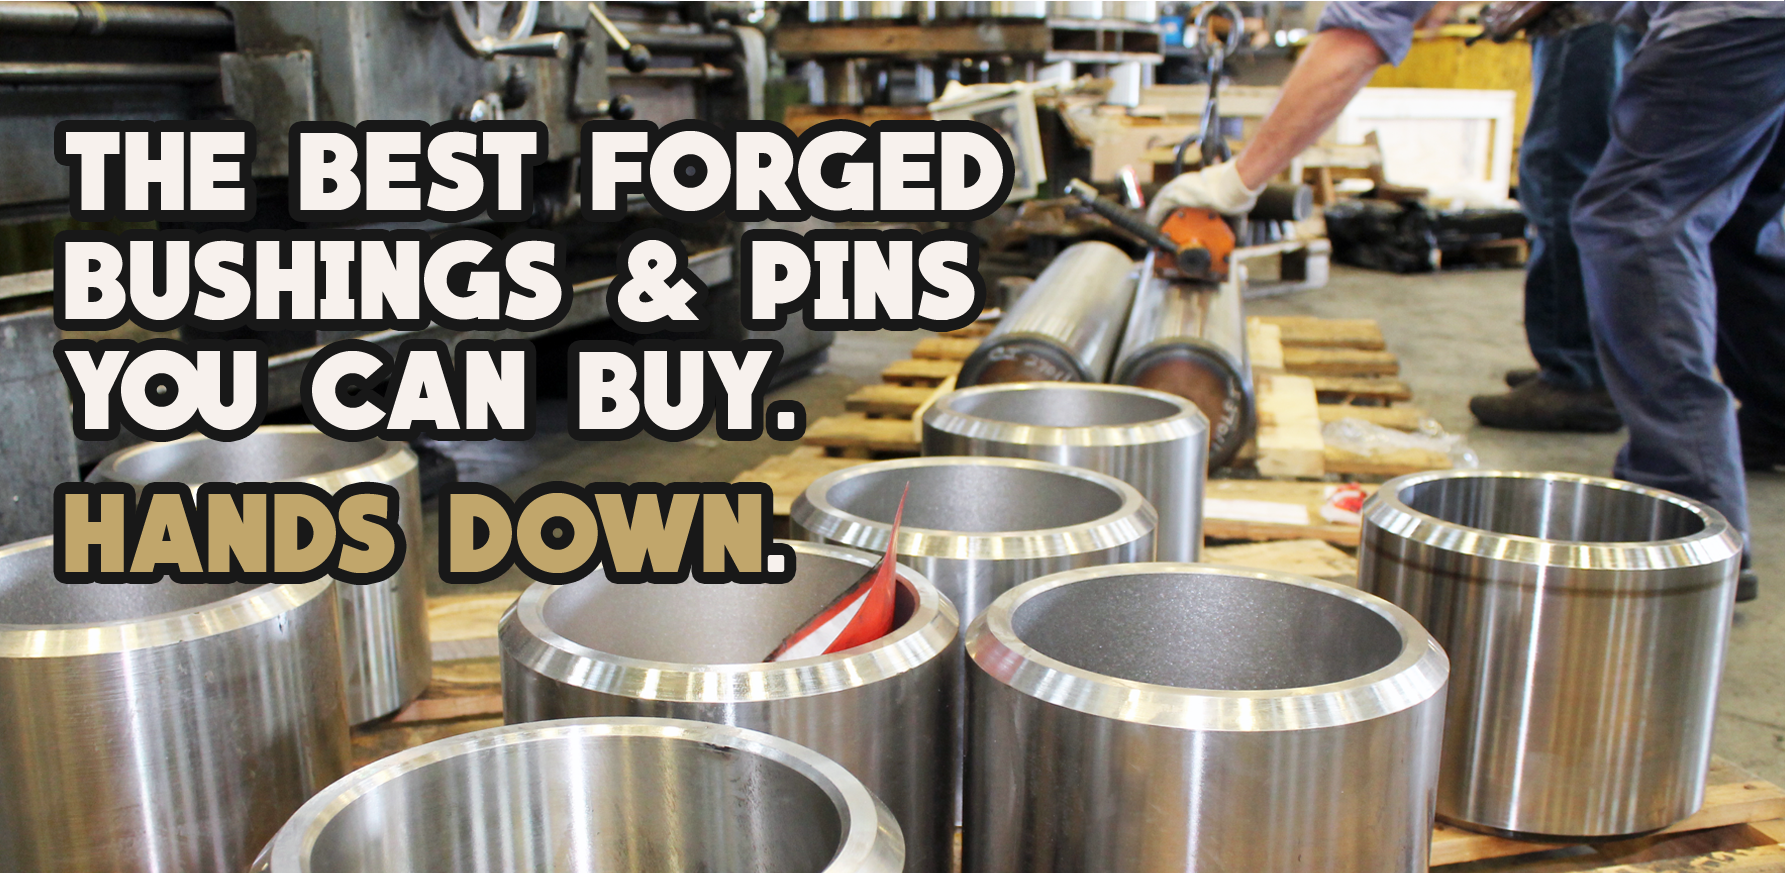 Best Forged Bushings and Pins from Wescott Steel